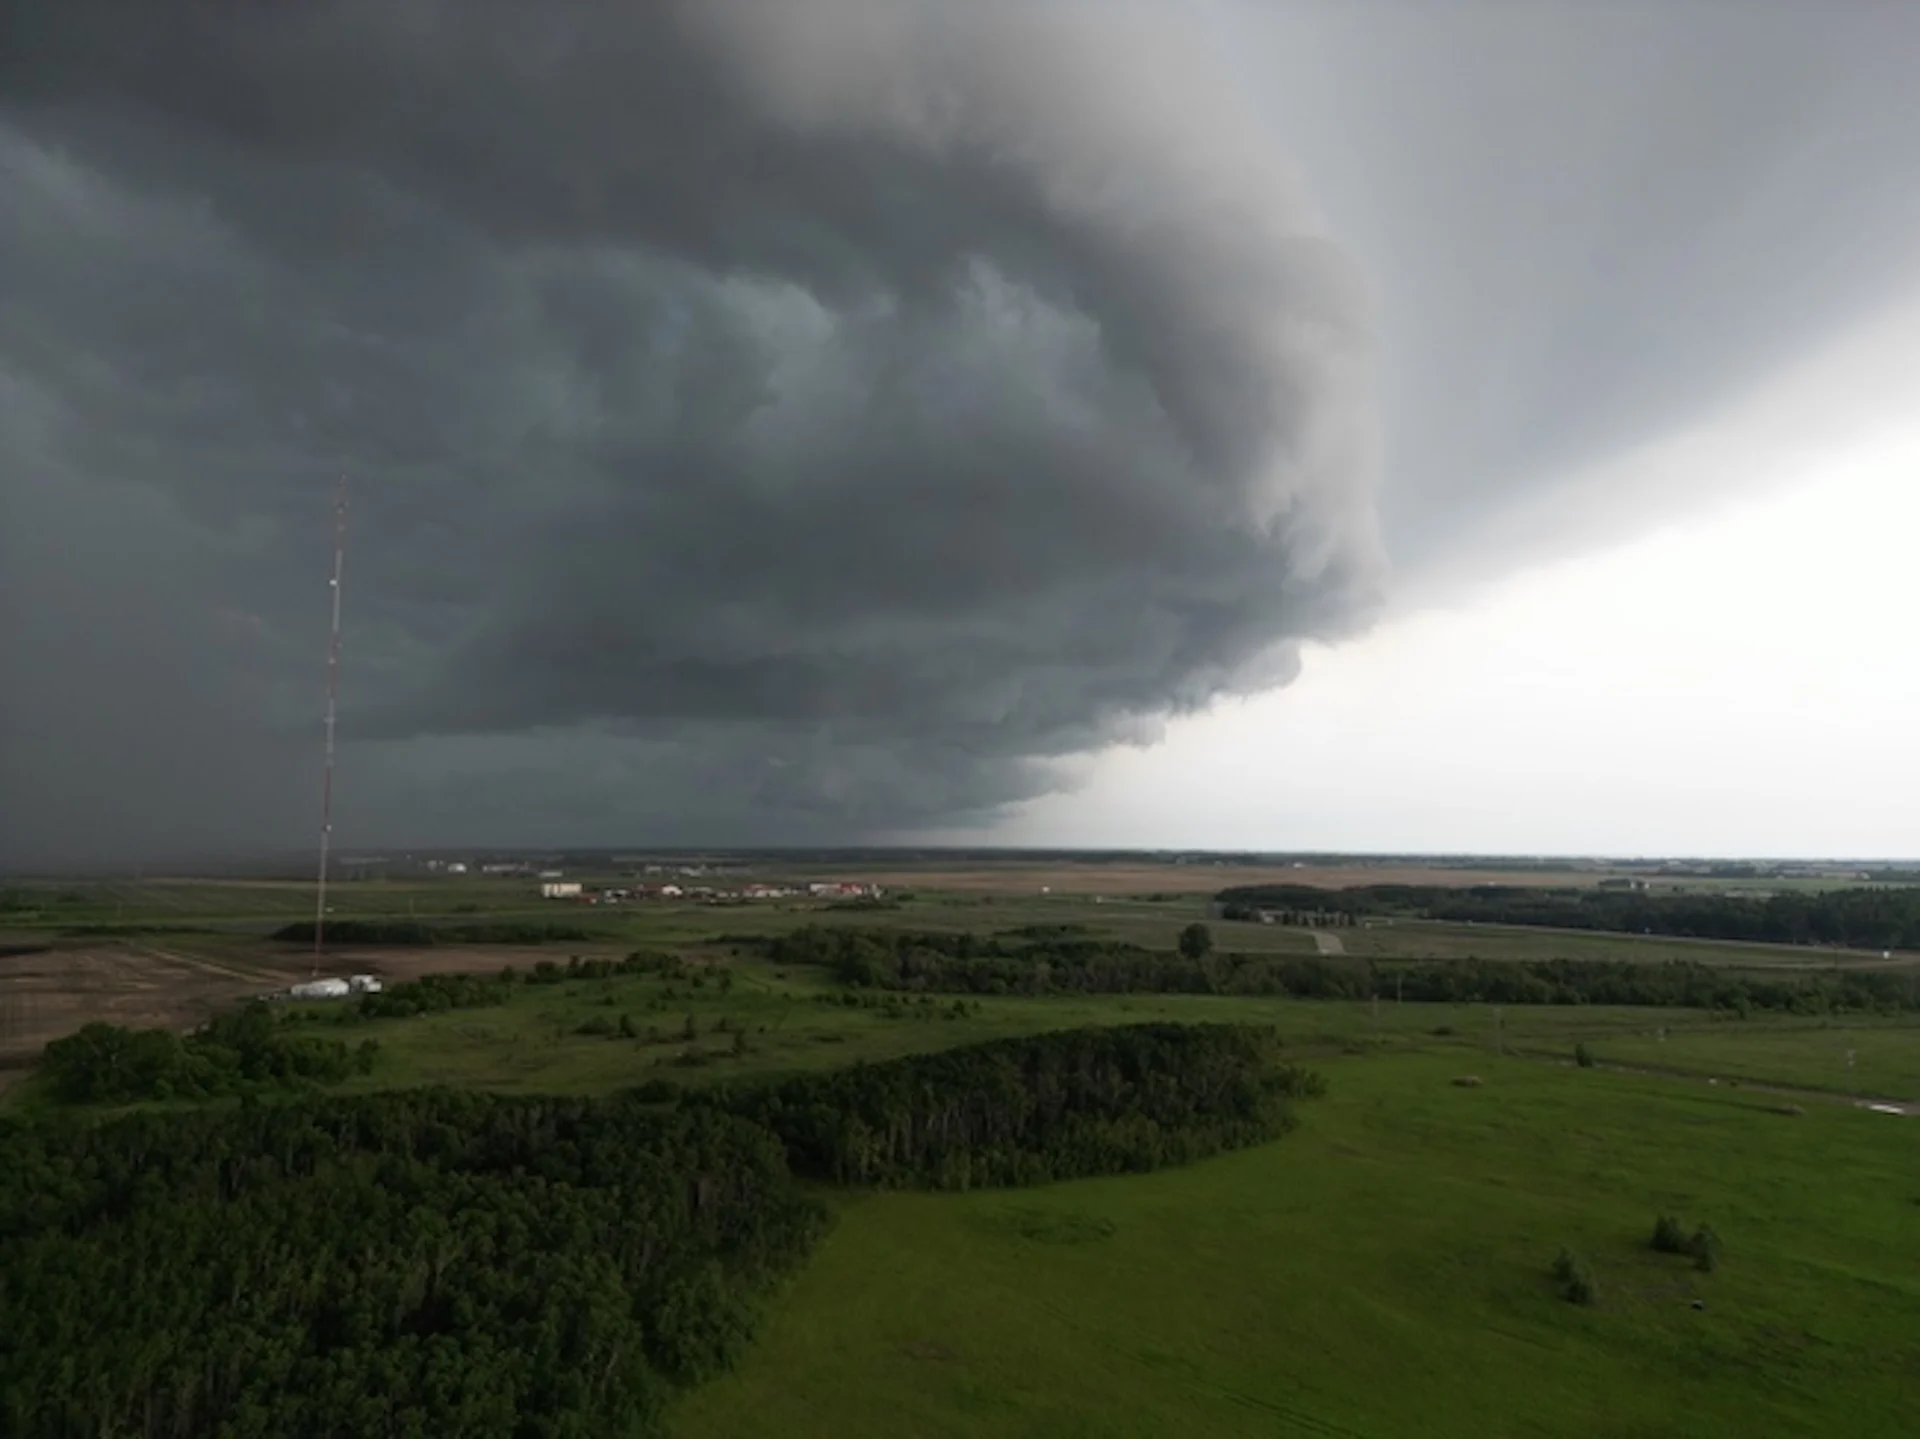 Tornado risk on parts of the Prairies amid severe storm chance Sunday